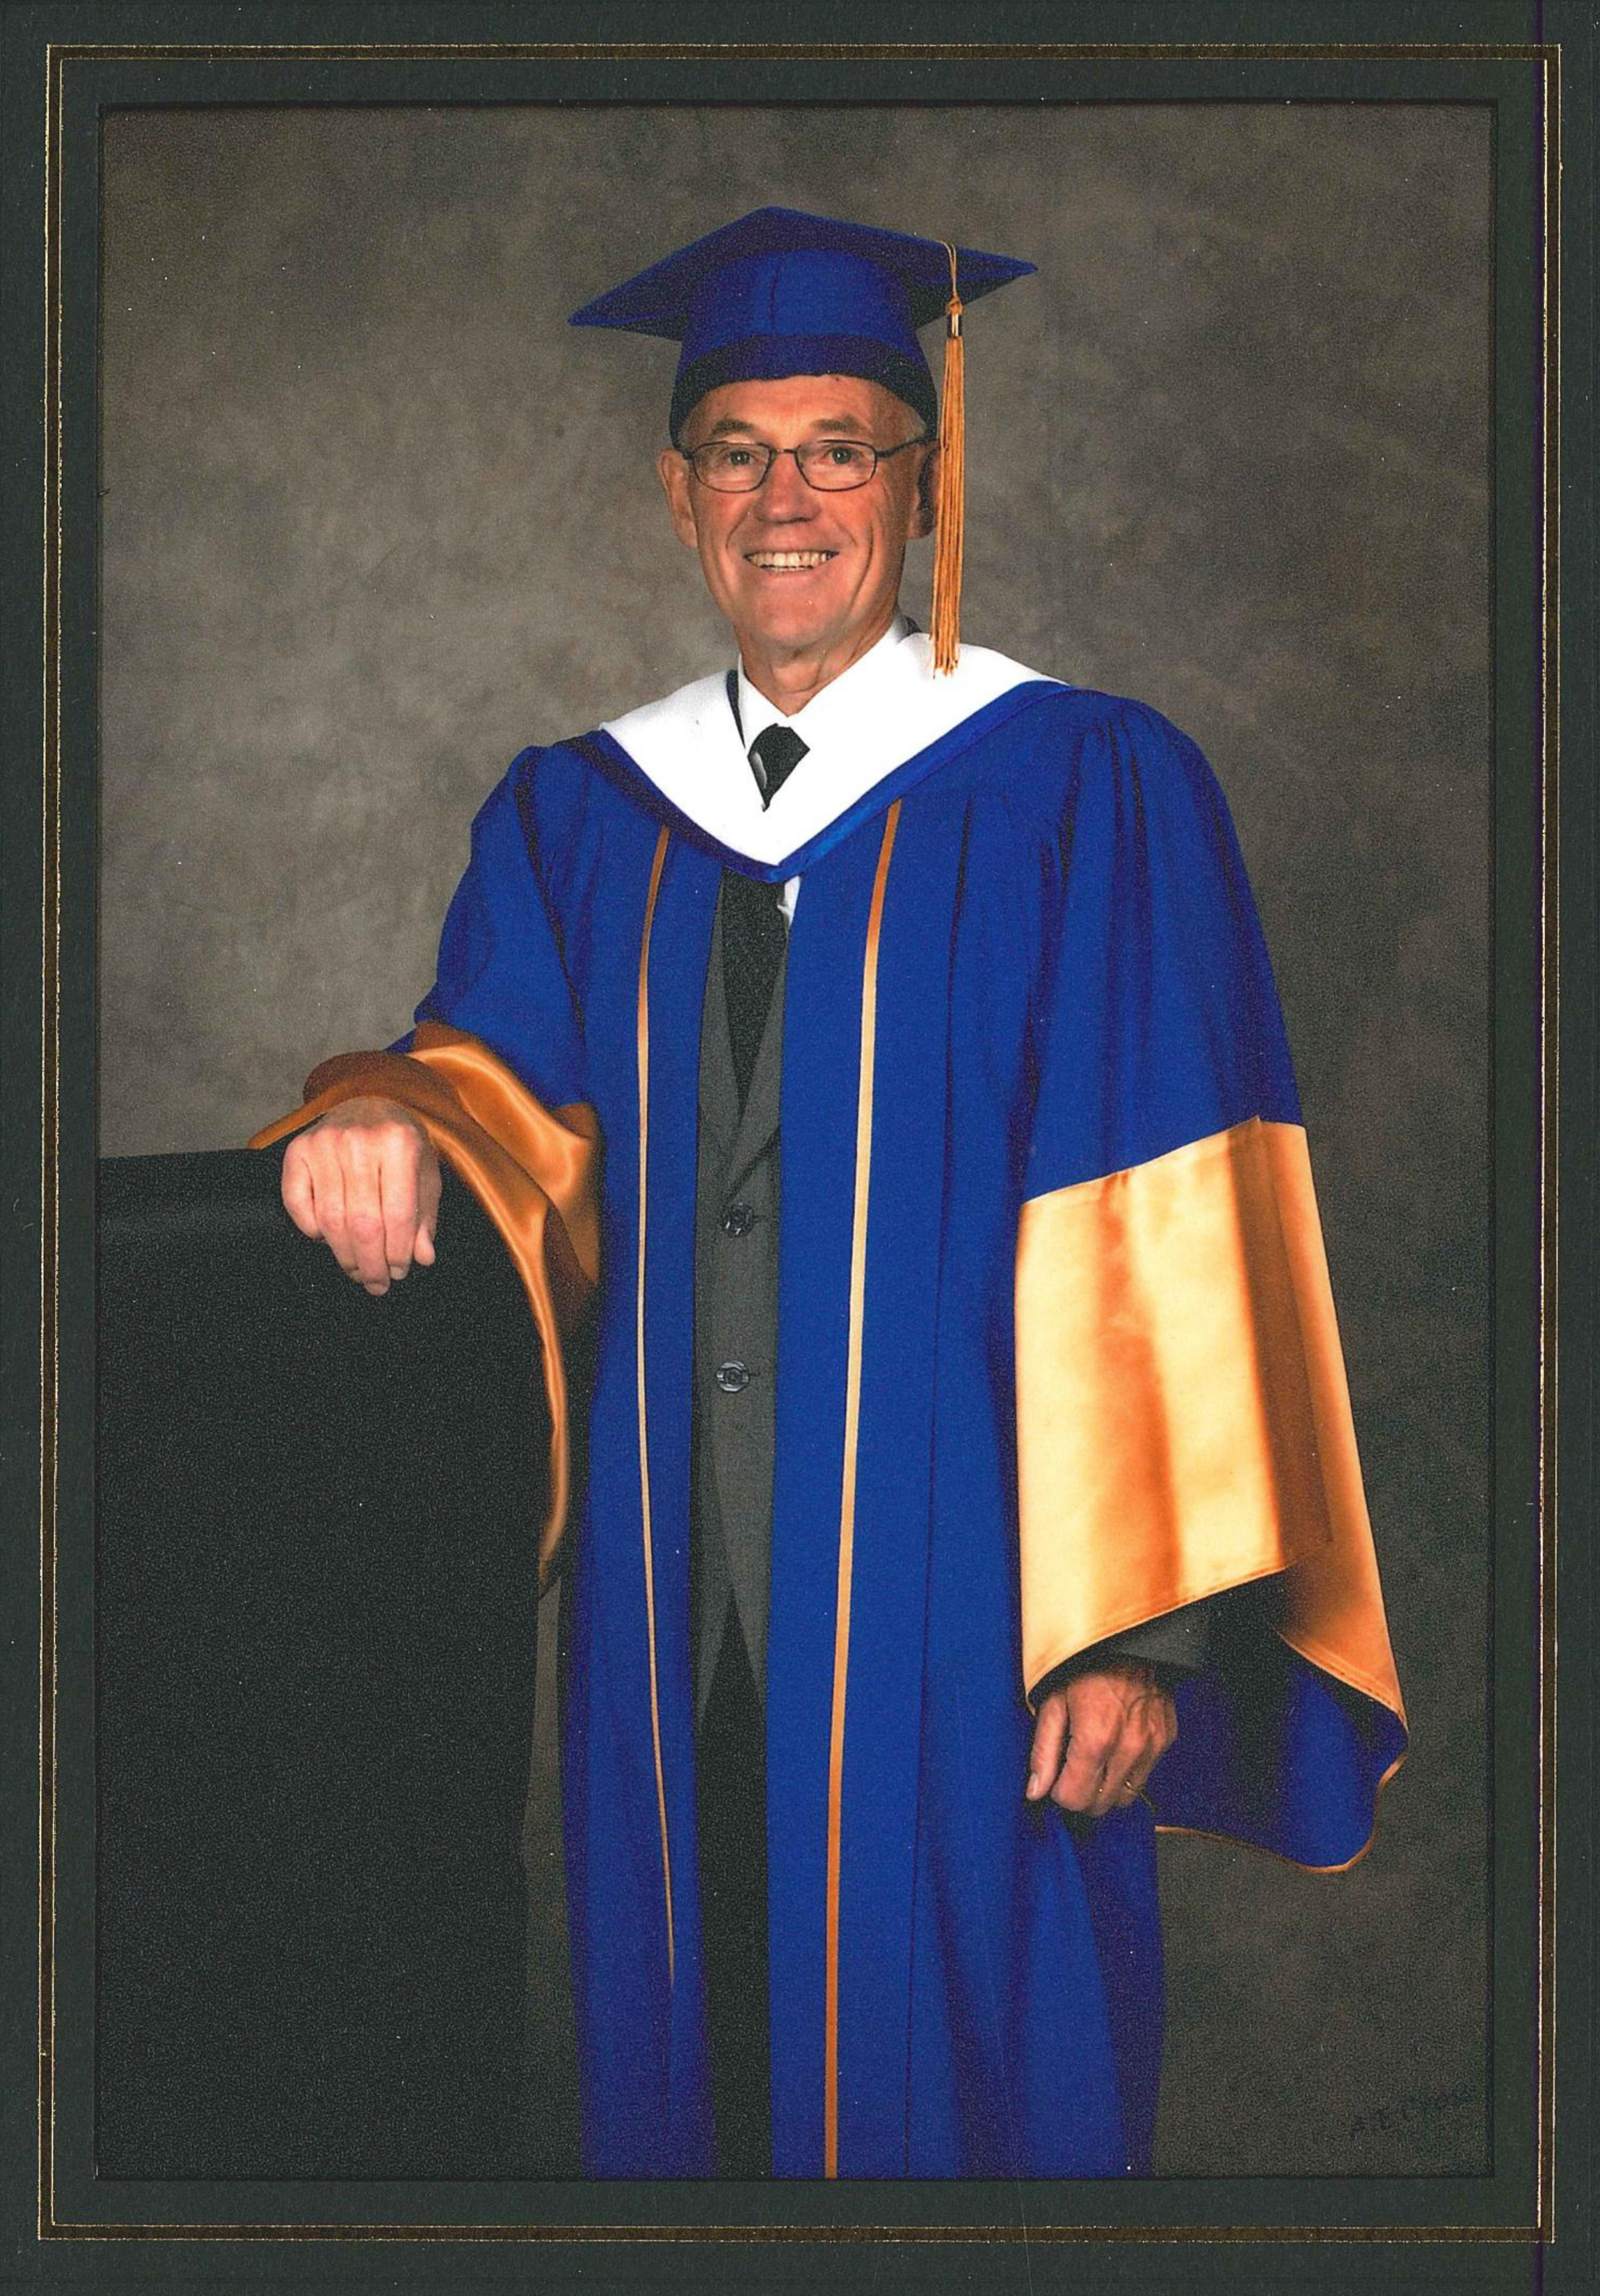 An older man with glasses wears a blue and gold university robe and cap, with his right hand resting on a chair.